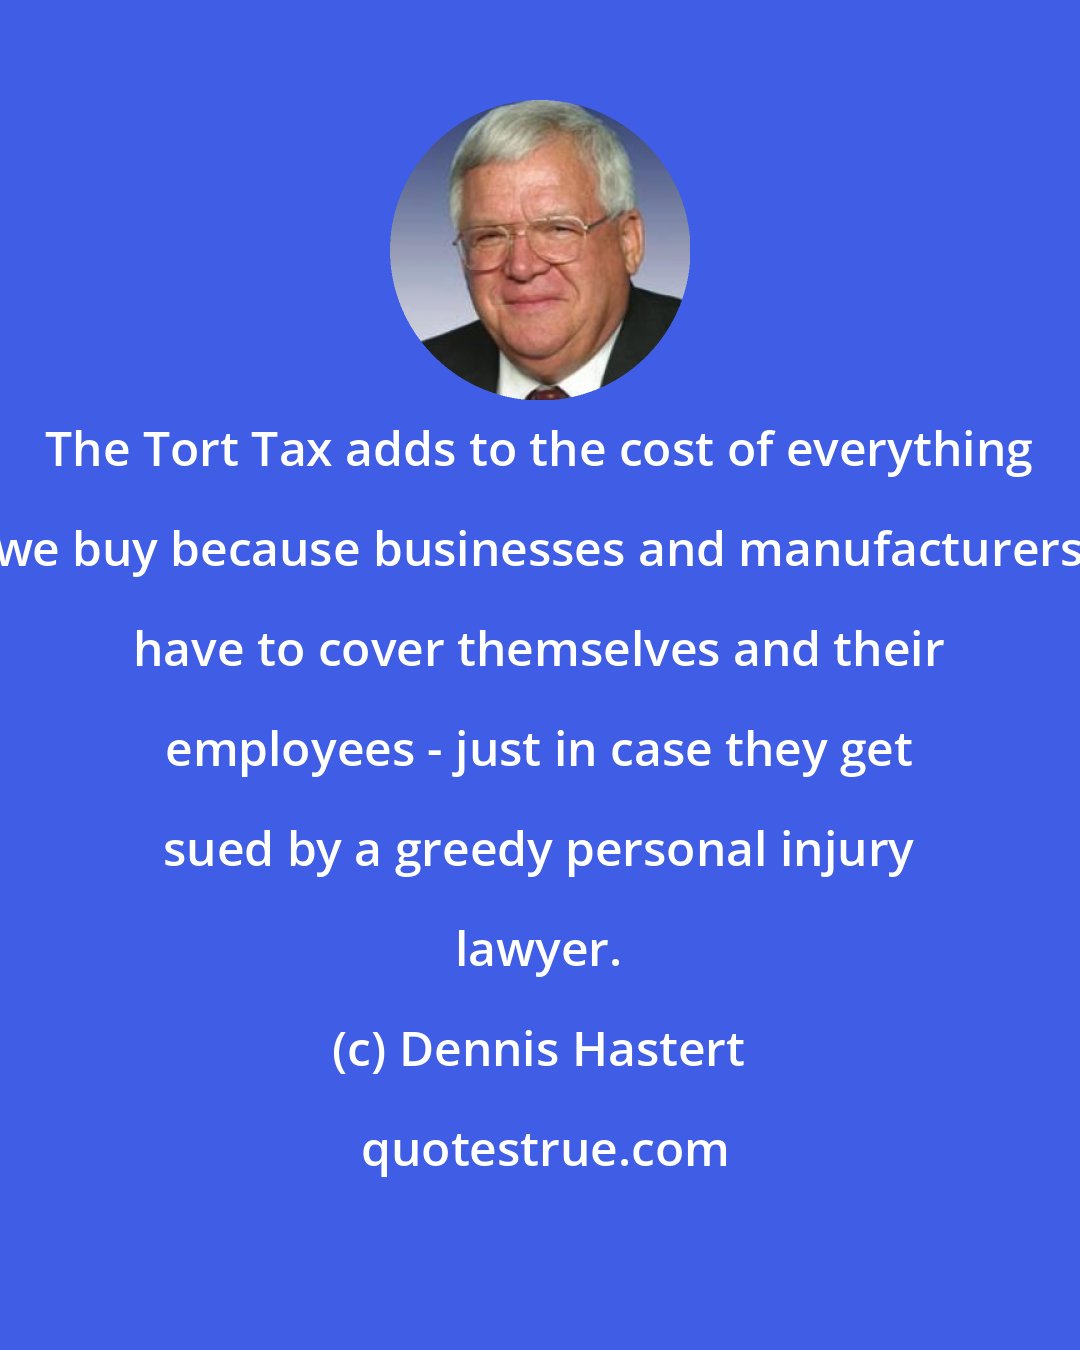 Dennis Hastert: The Tort Tax adds to the cost of everything we buy because businesses and manufacturers have to cover themselves and their employees - just in case they get sued by a greedy personal injury lawyer.